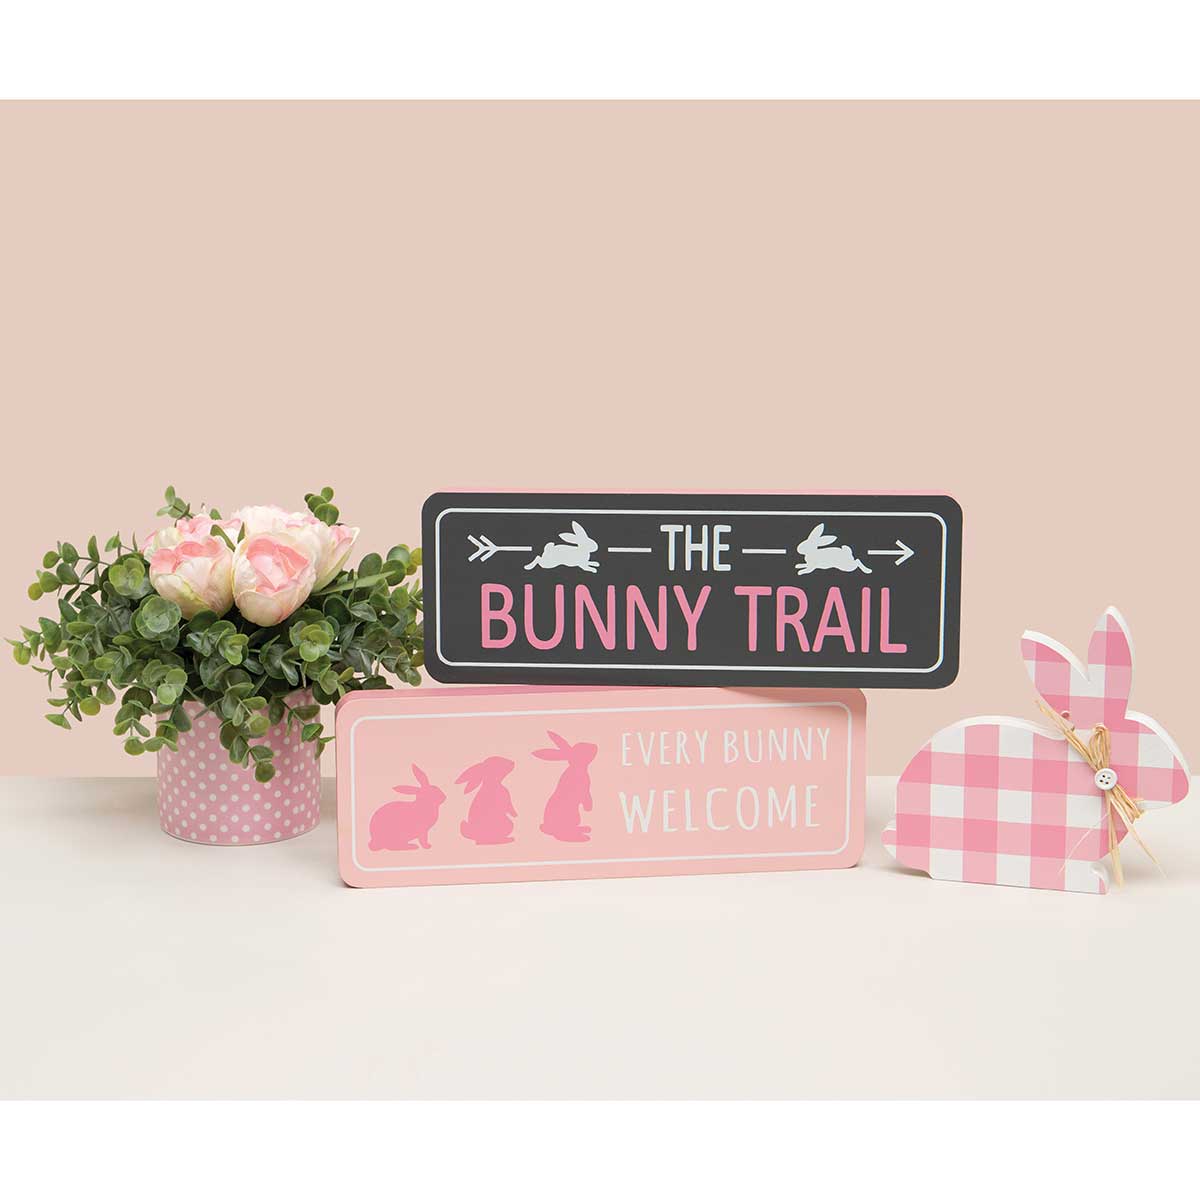 !Every Bunny Welcome and The Bunny Trail